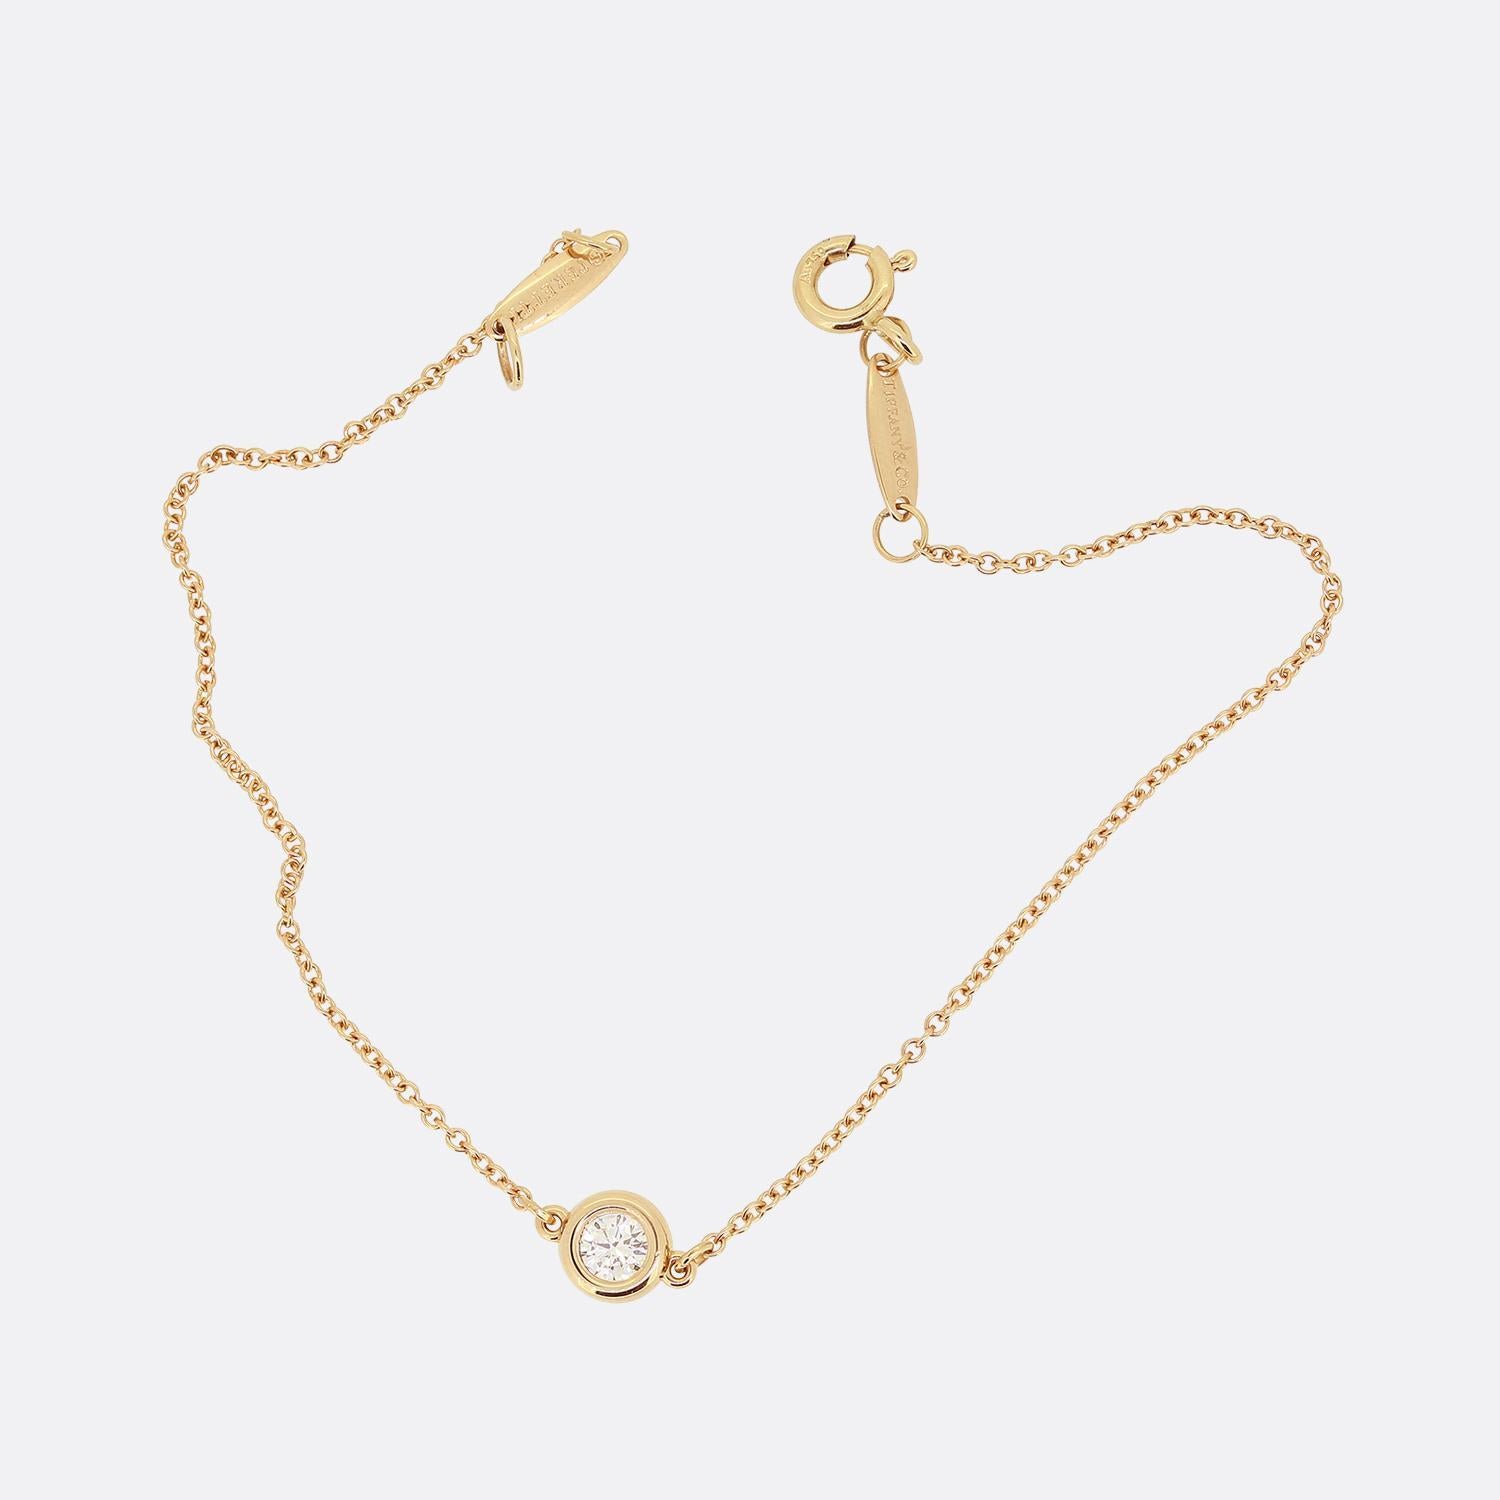 Here we have a classic 'Diamonds by the Yard' bracelet from the world renowned luxury jewellery designer, Tiffany & Co. A slim 18ct rose gold belcher chain plays host to a single scintillating rub-over set 0.14ct round brilliant cut diamond which is